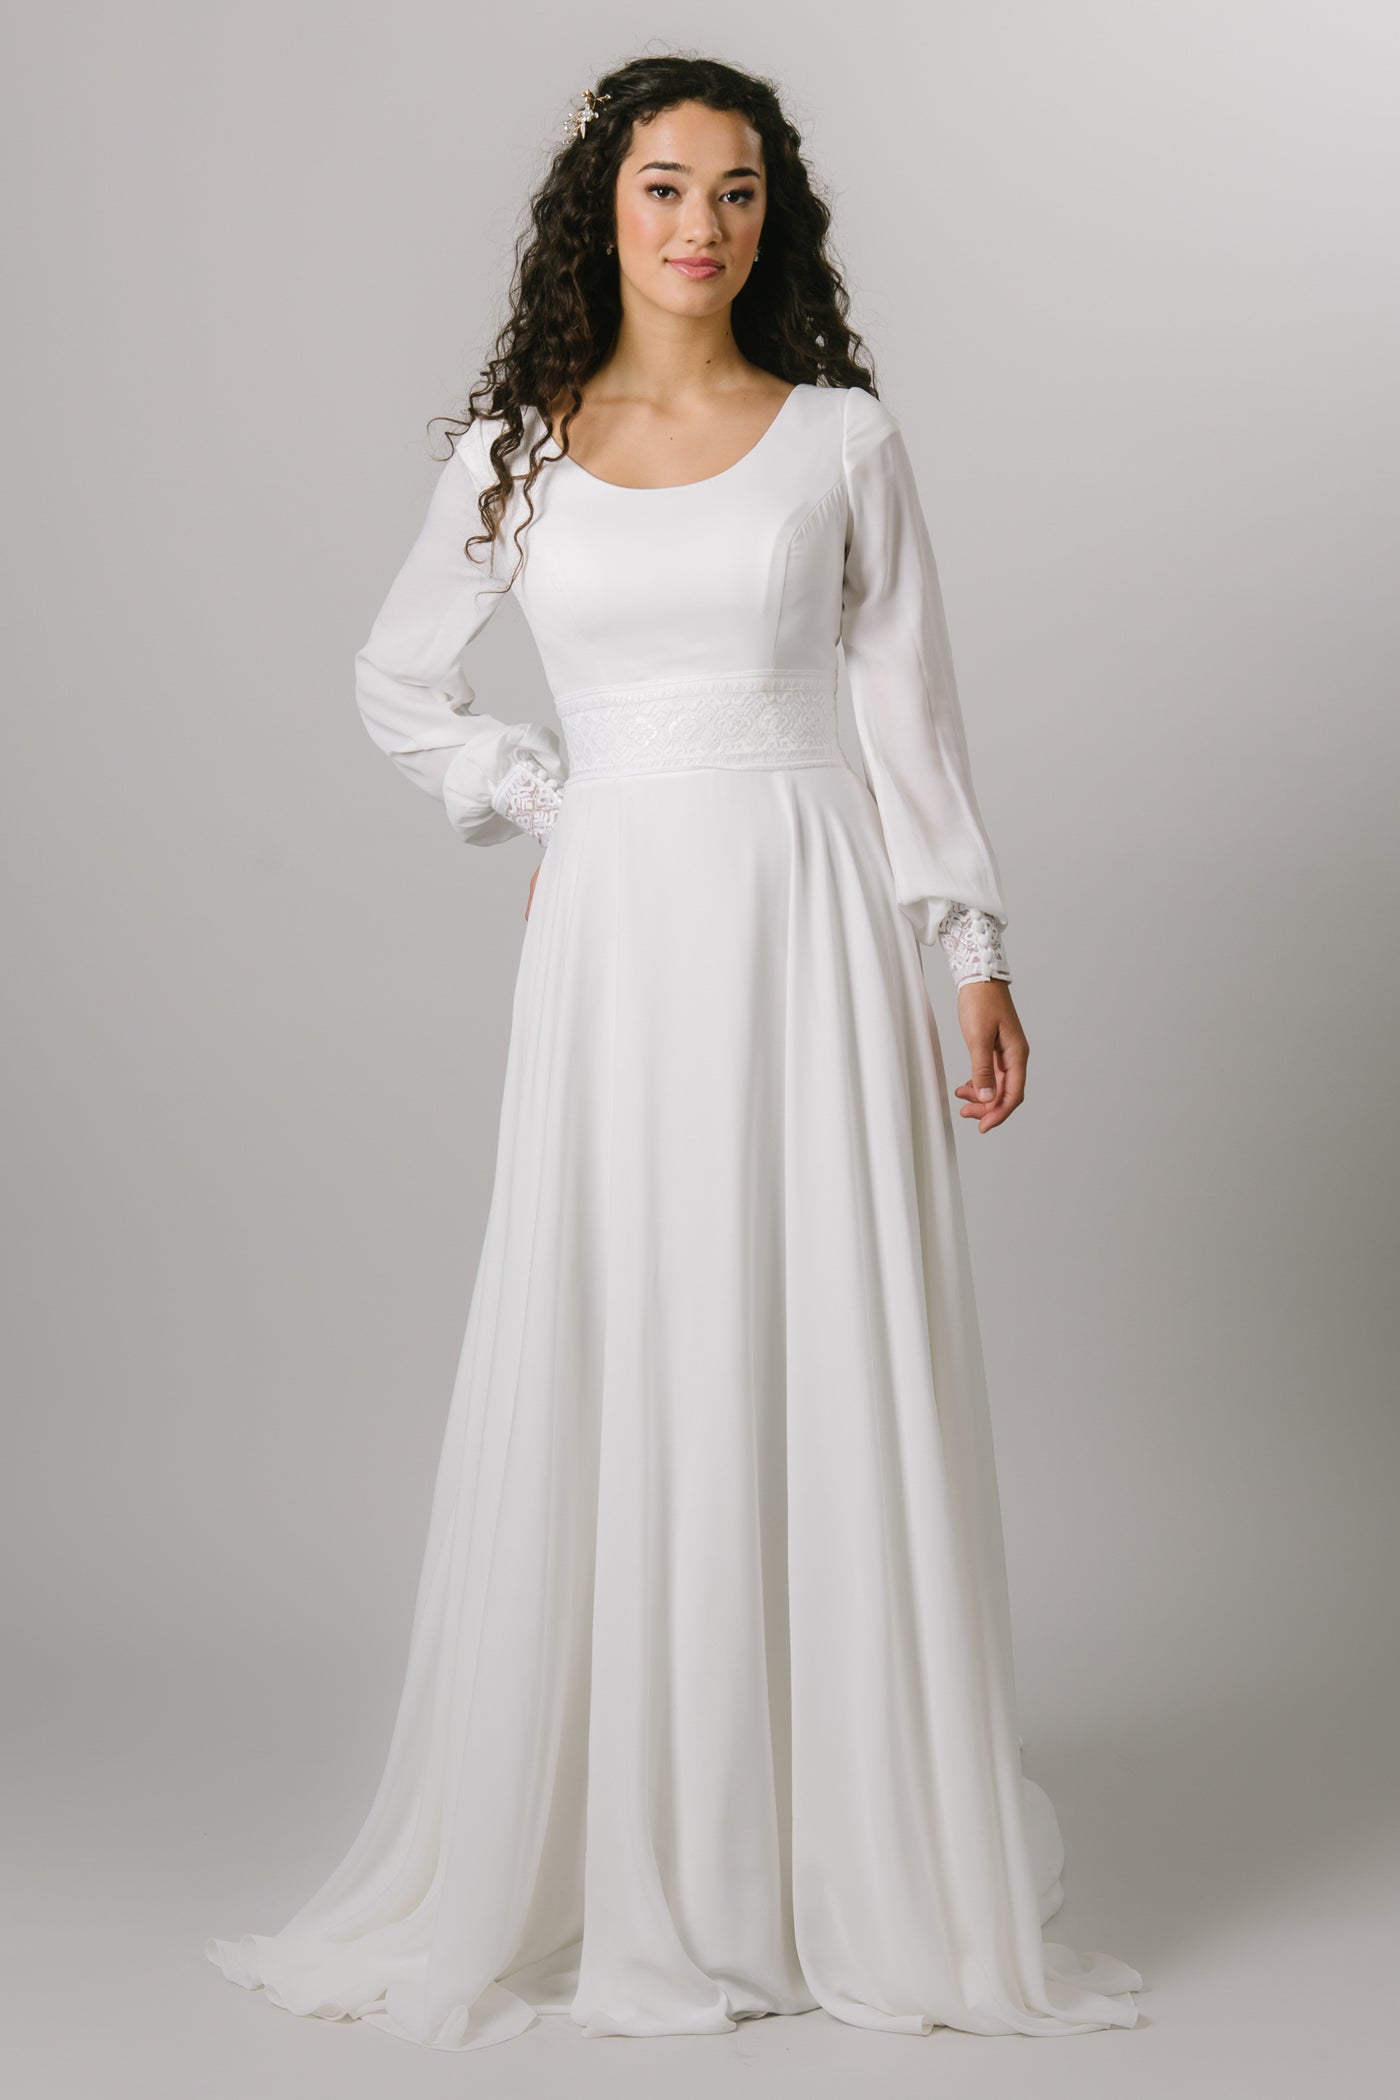 This simple modest wedding gown features long sleeves, and an A-line silhouette. 